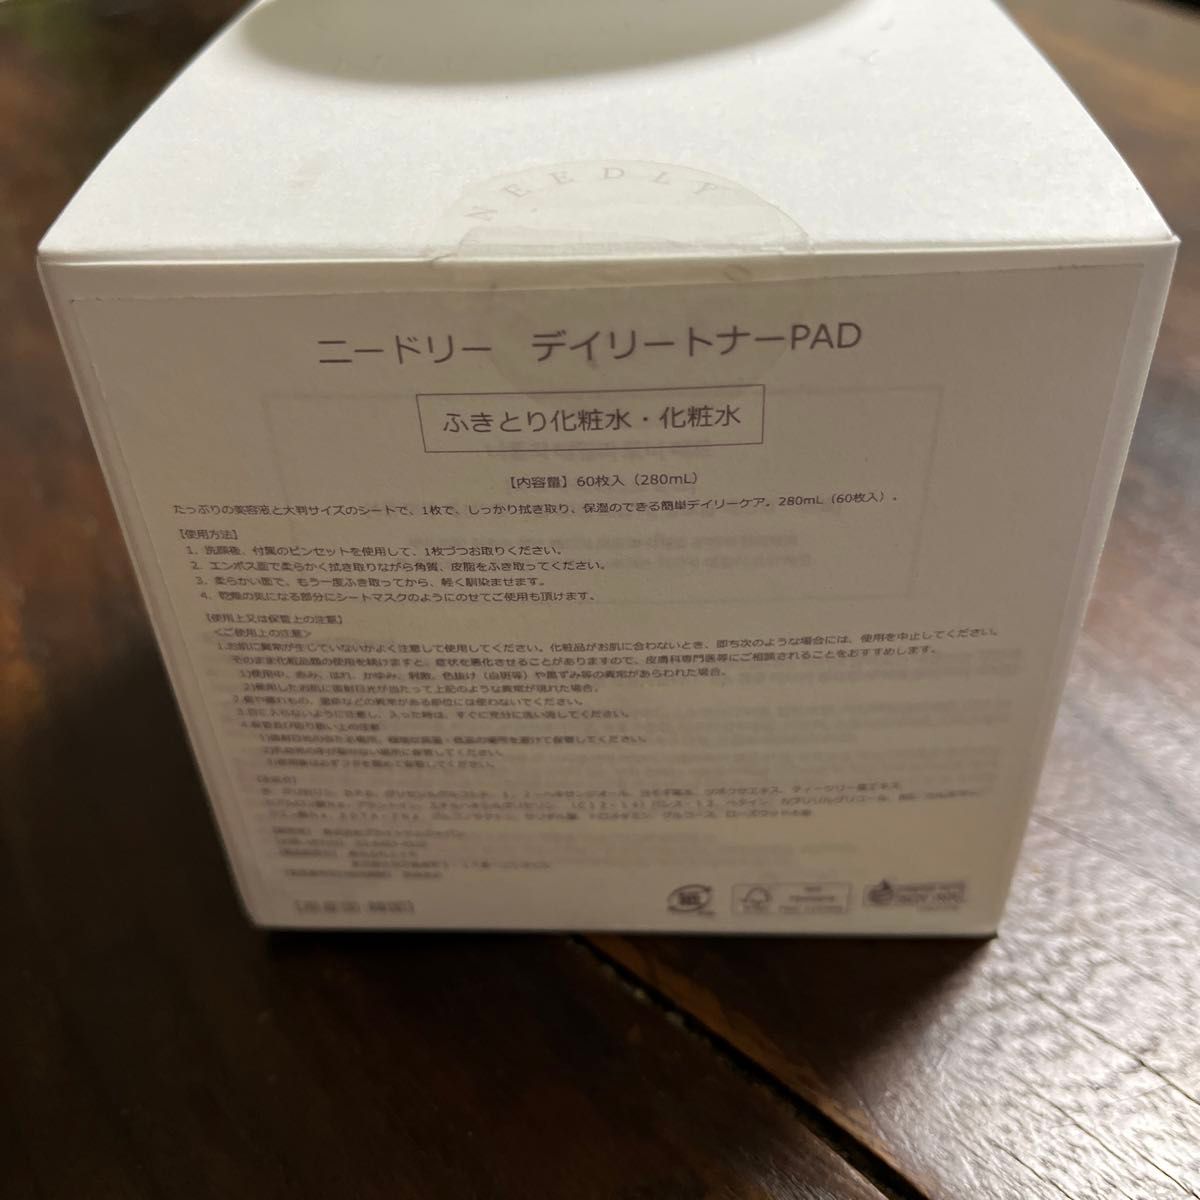 NEEDLY daily toner pack デイリートナーパック　新品未開封　60枚入り